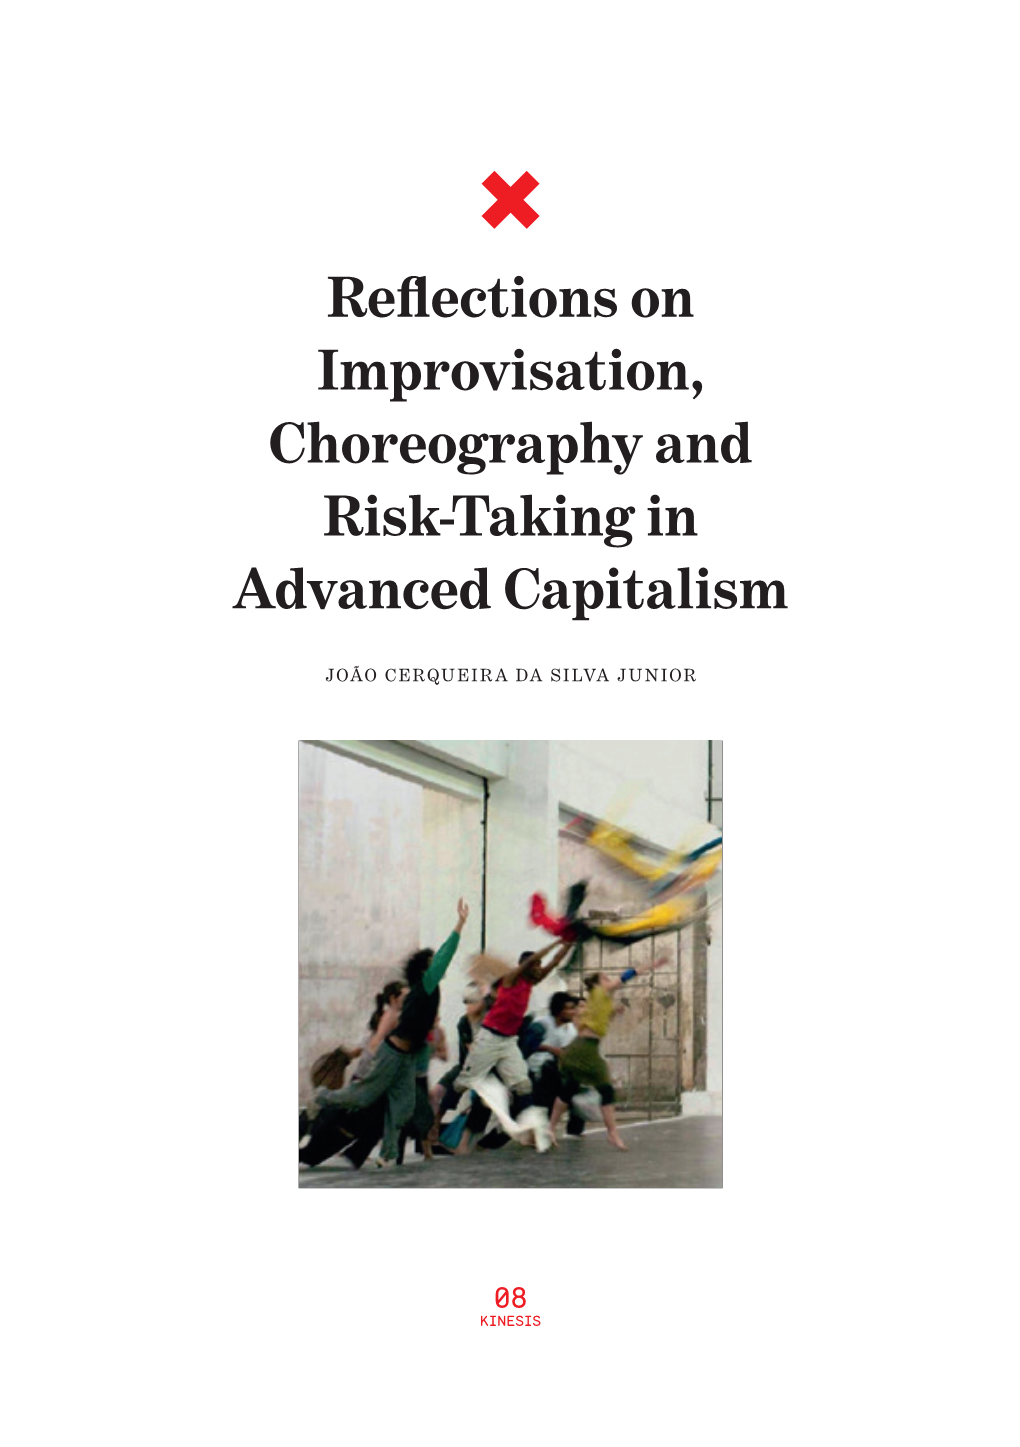 Reflections on Improvisation, Choreography and Risk-Taking in Advanced Capitalism